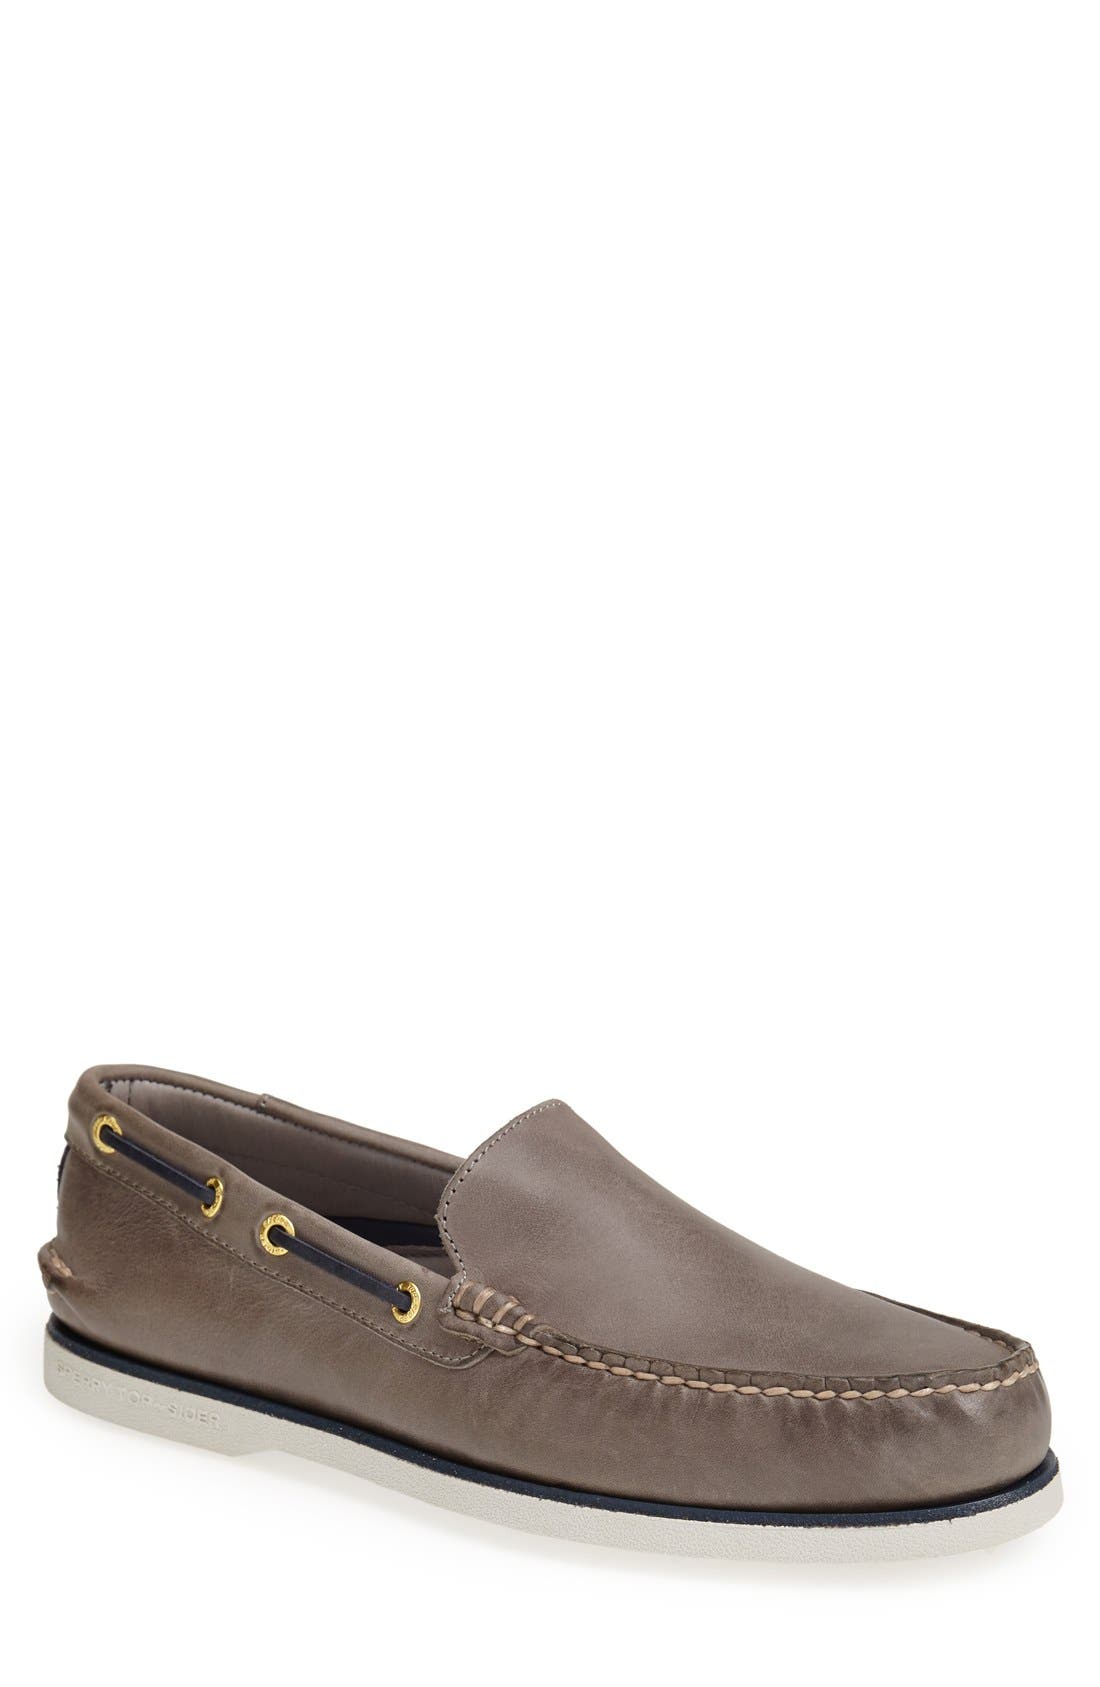 sperry gold cup nordstrom